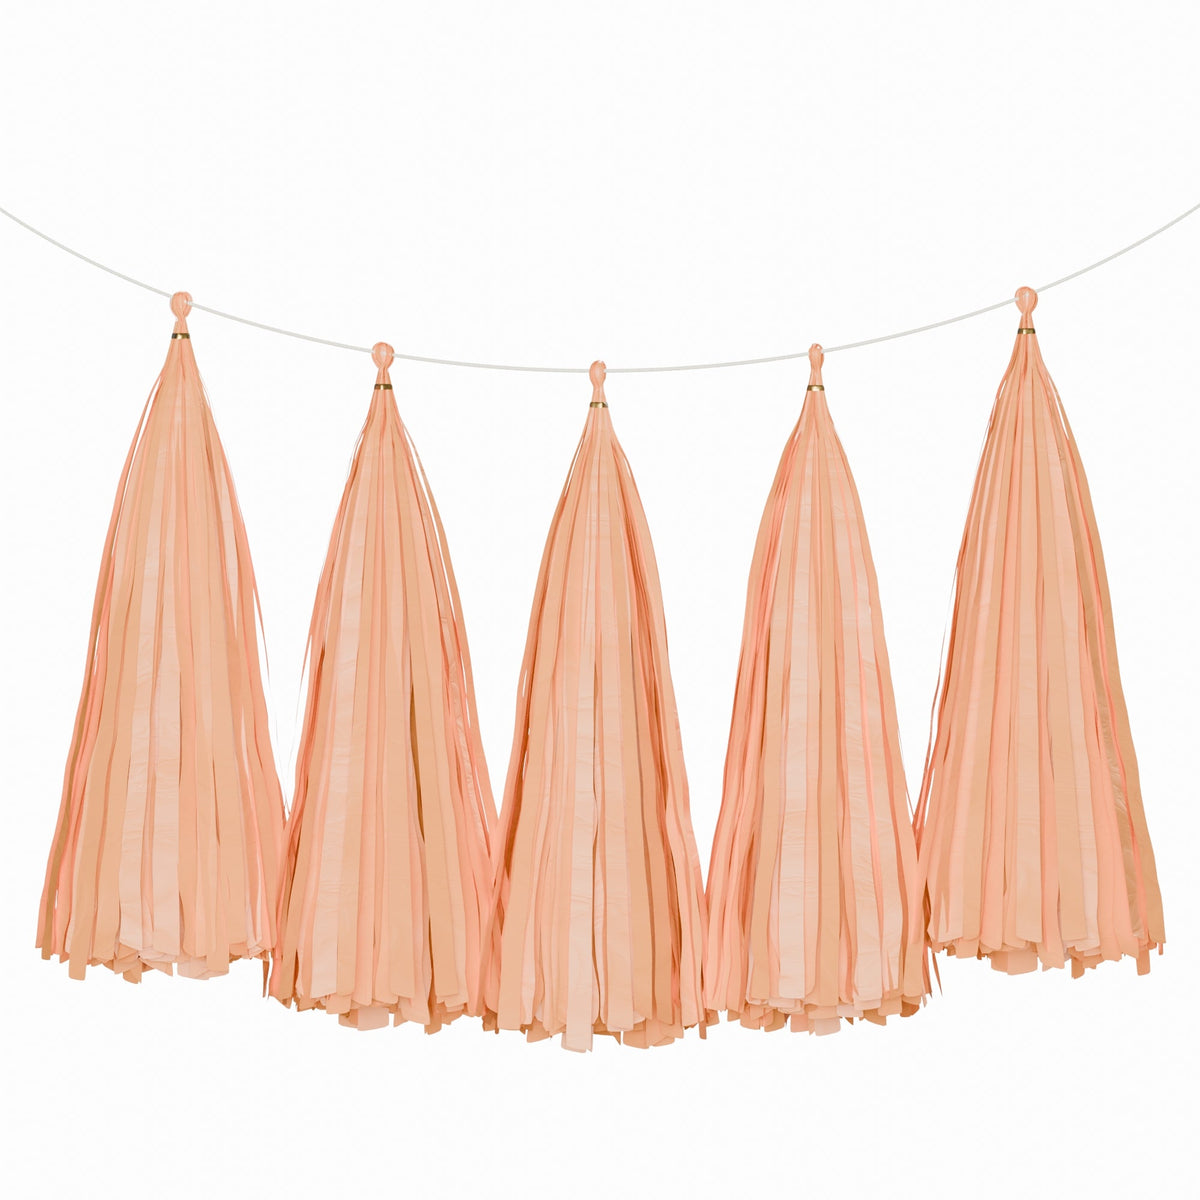 Weifang Mayshine Imp&exp co Decorations Peach Tassel Garland, 5 Count 810064197178